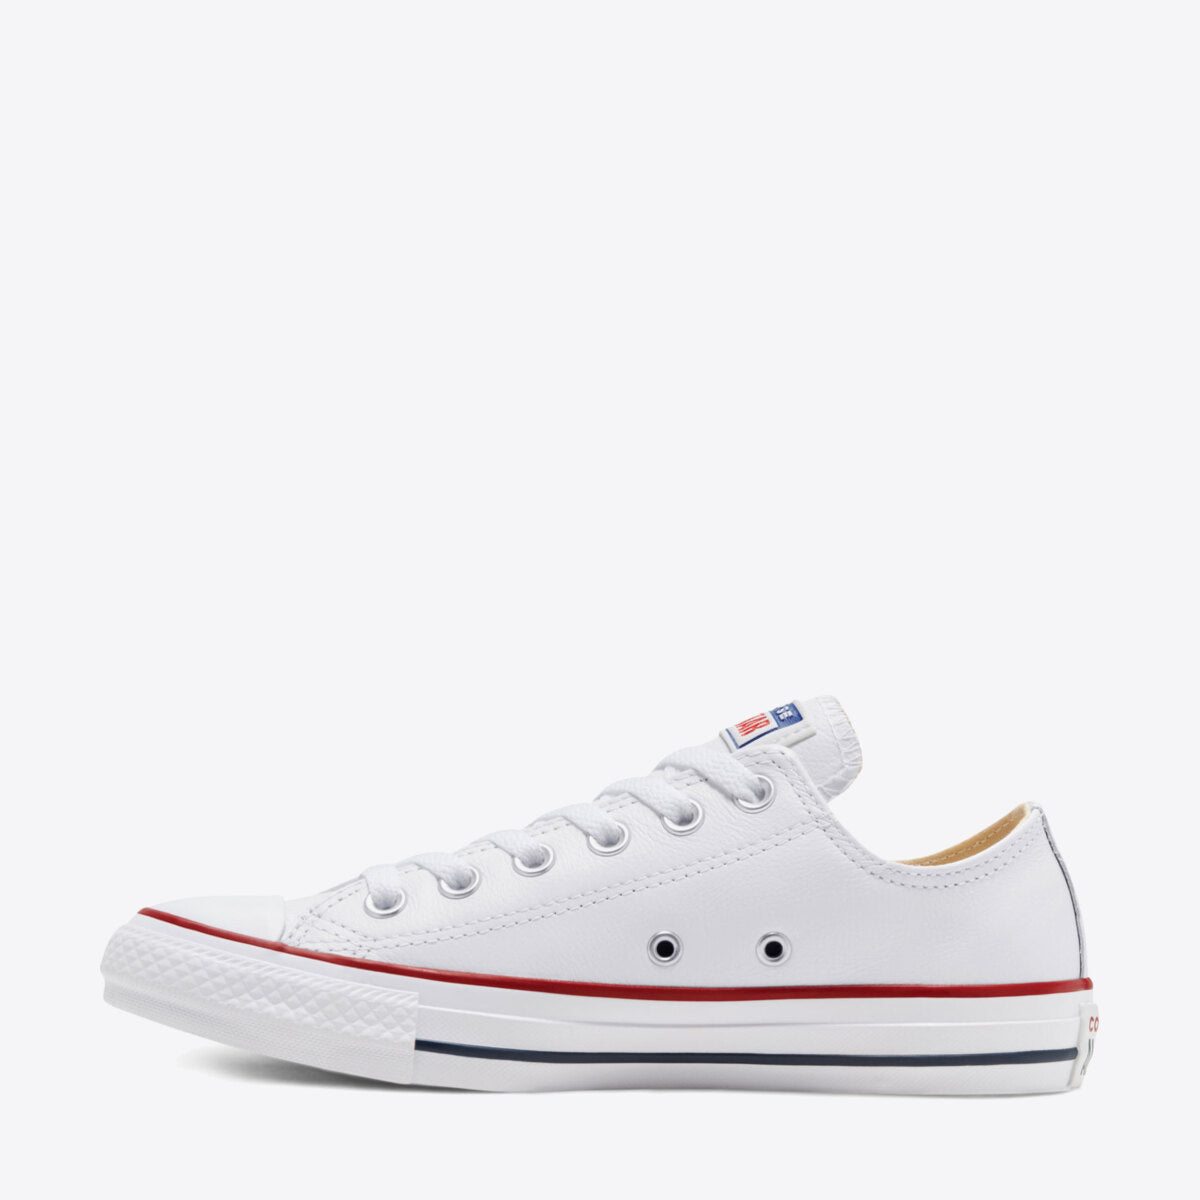 CONVERSE Chuck Taylor All Star Leather Low White - Image 0